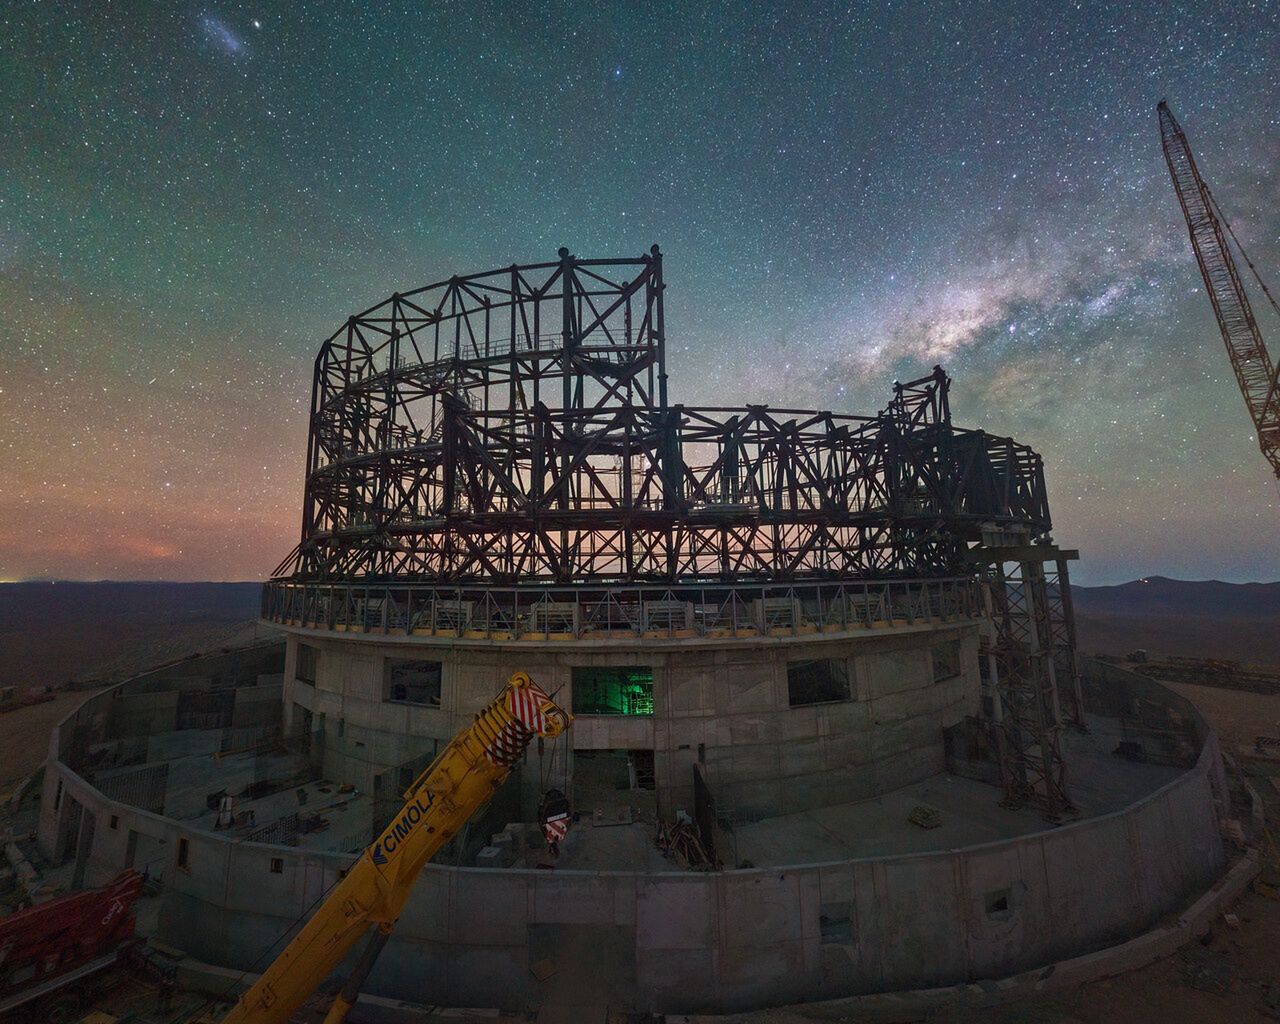 Time Capsule of the Extremely Large Telescope. It was sunk in concrete